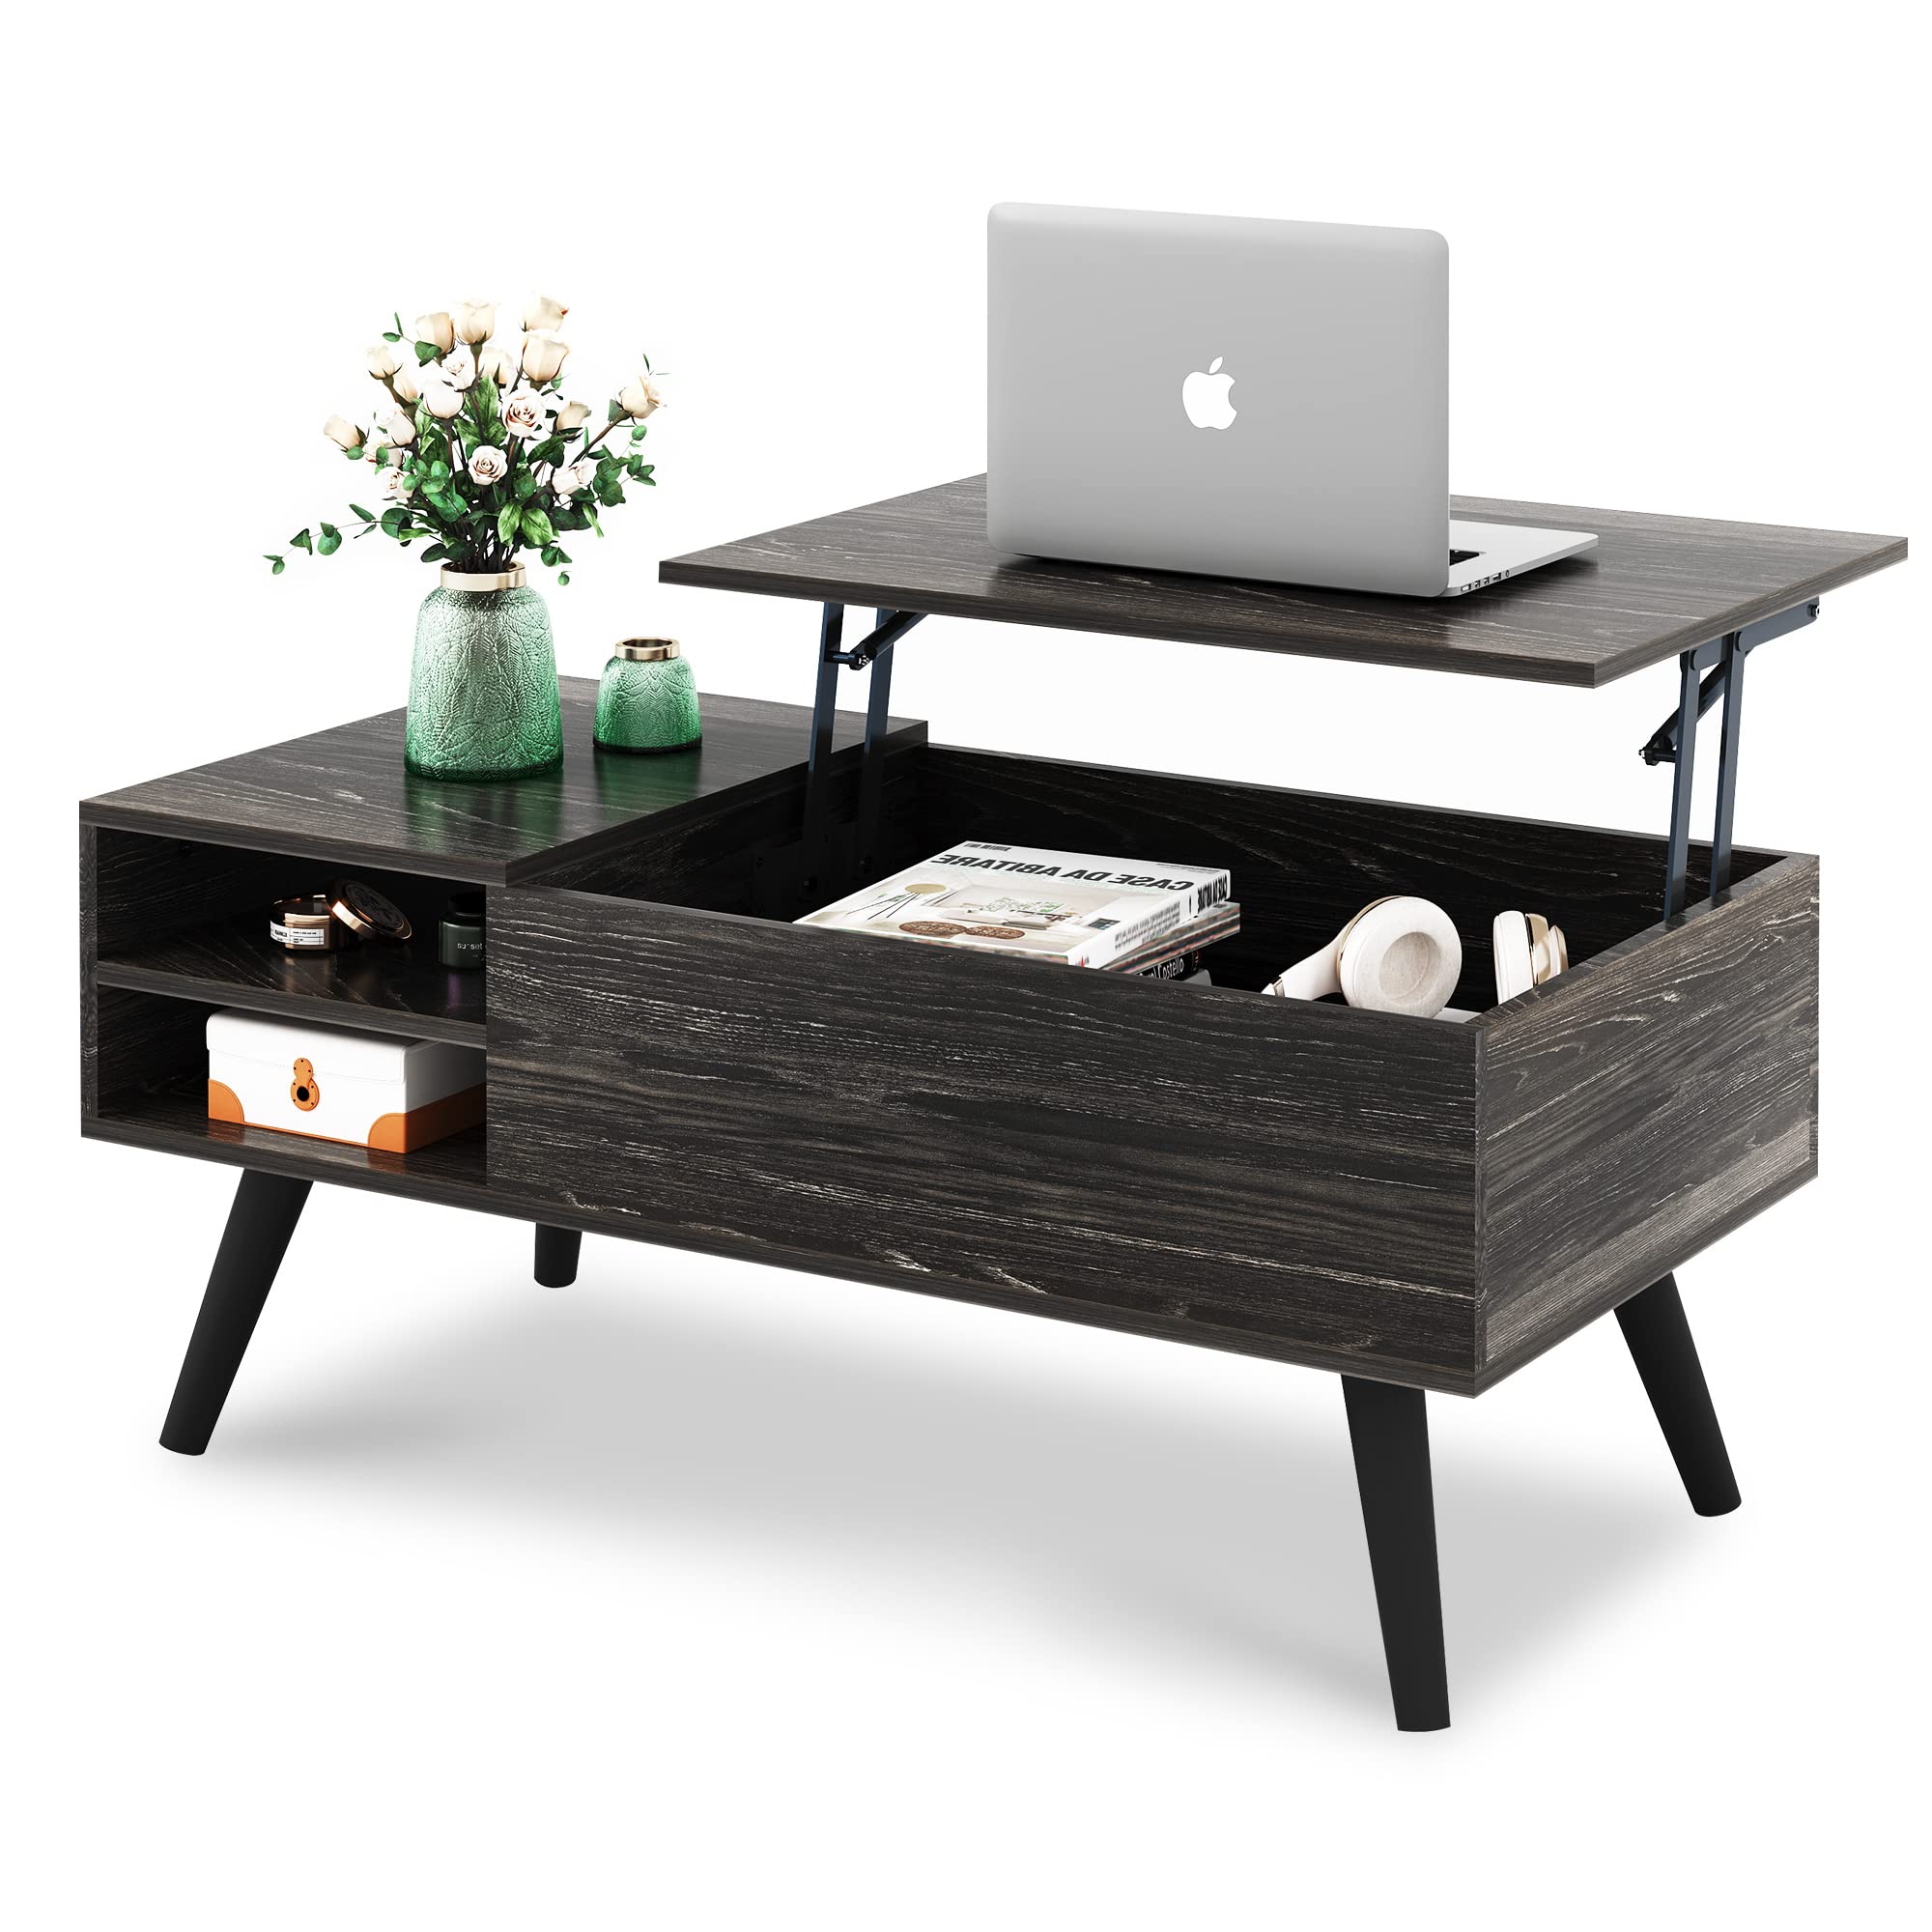 WLIVE Wood Lift top Coffee Table